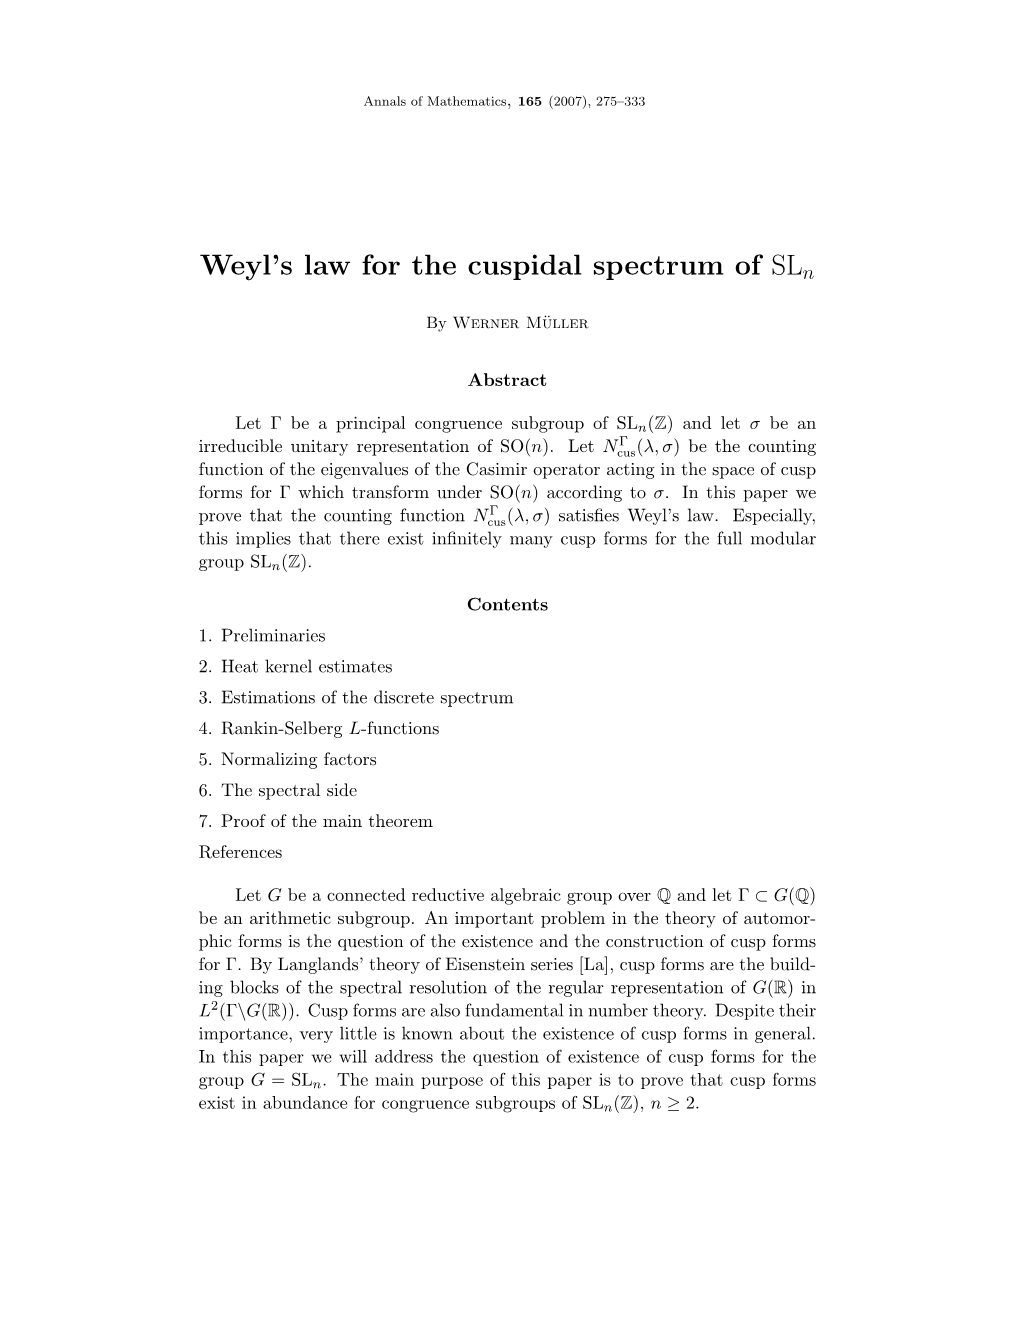 Weyl's Law for the Cuspidal Spectrum Of